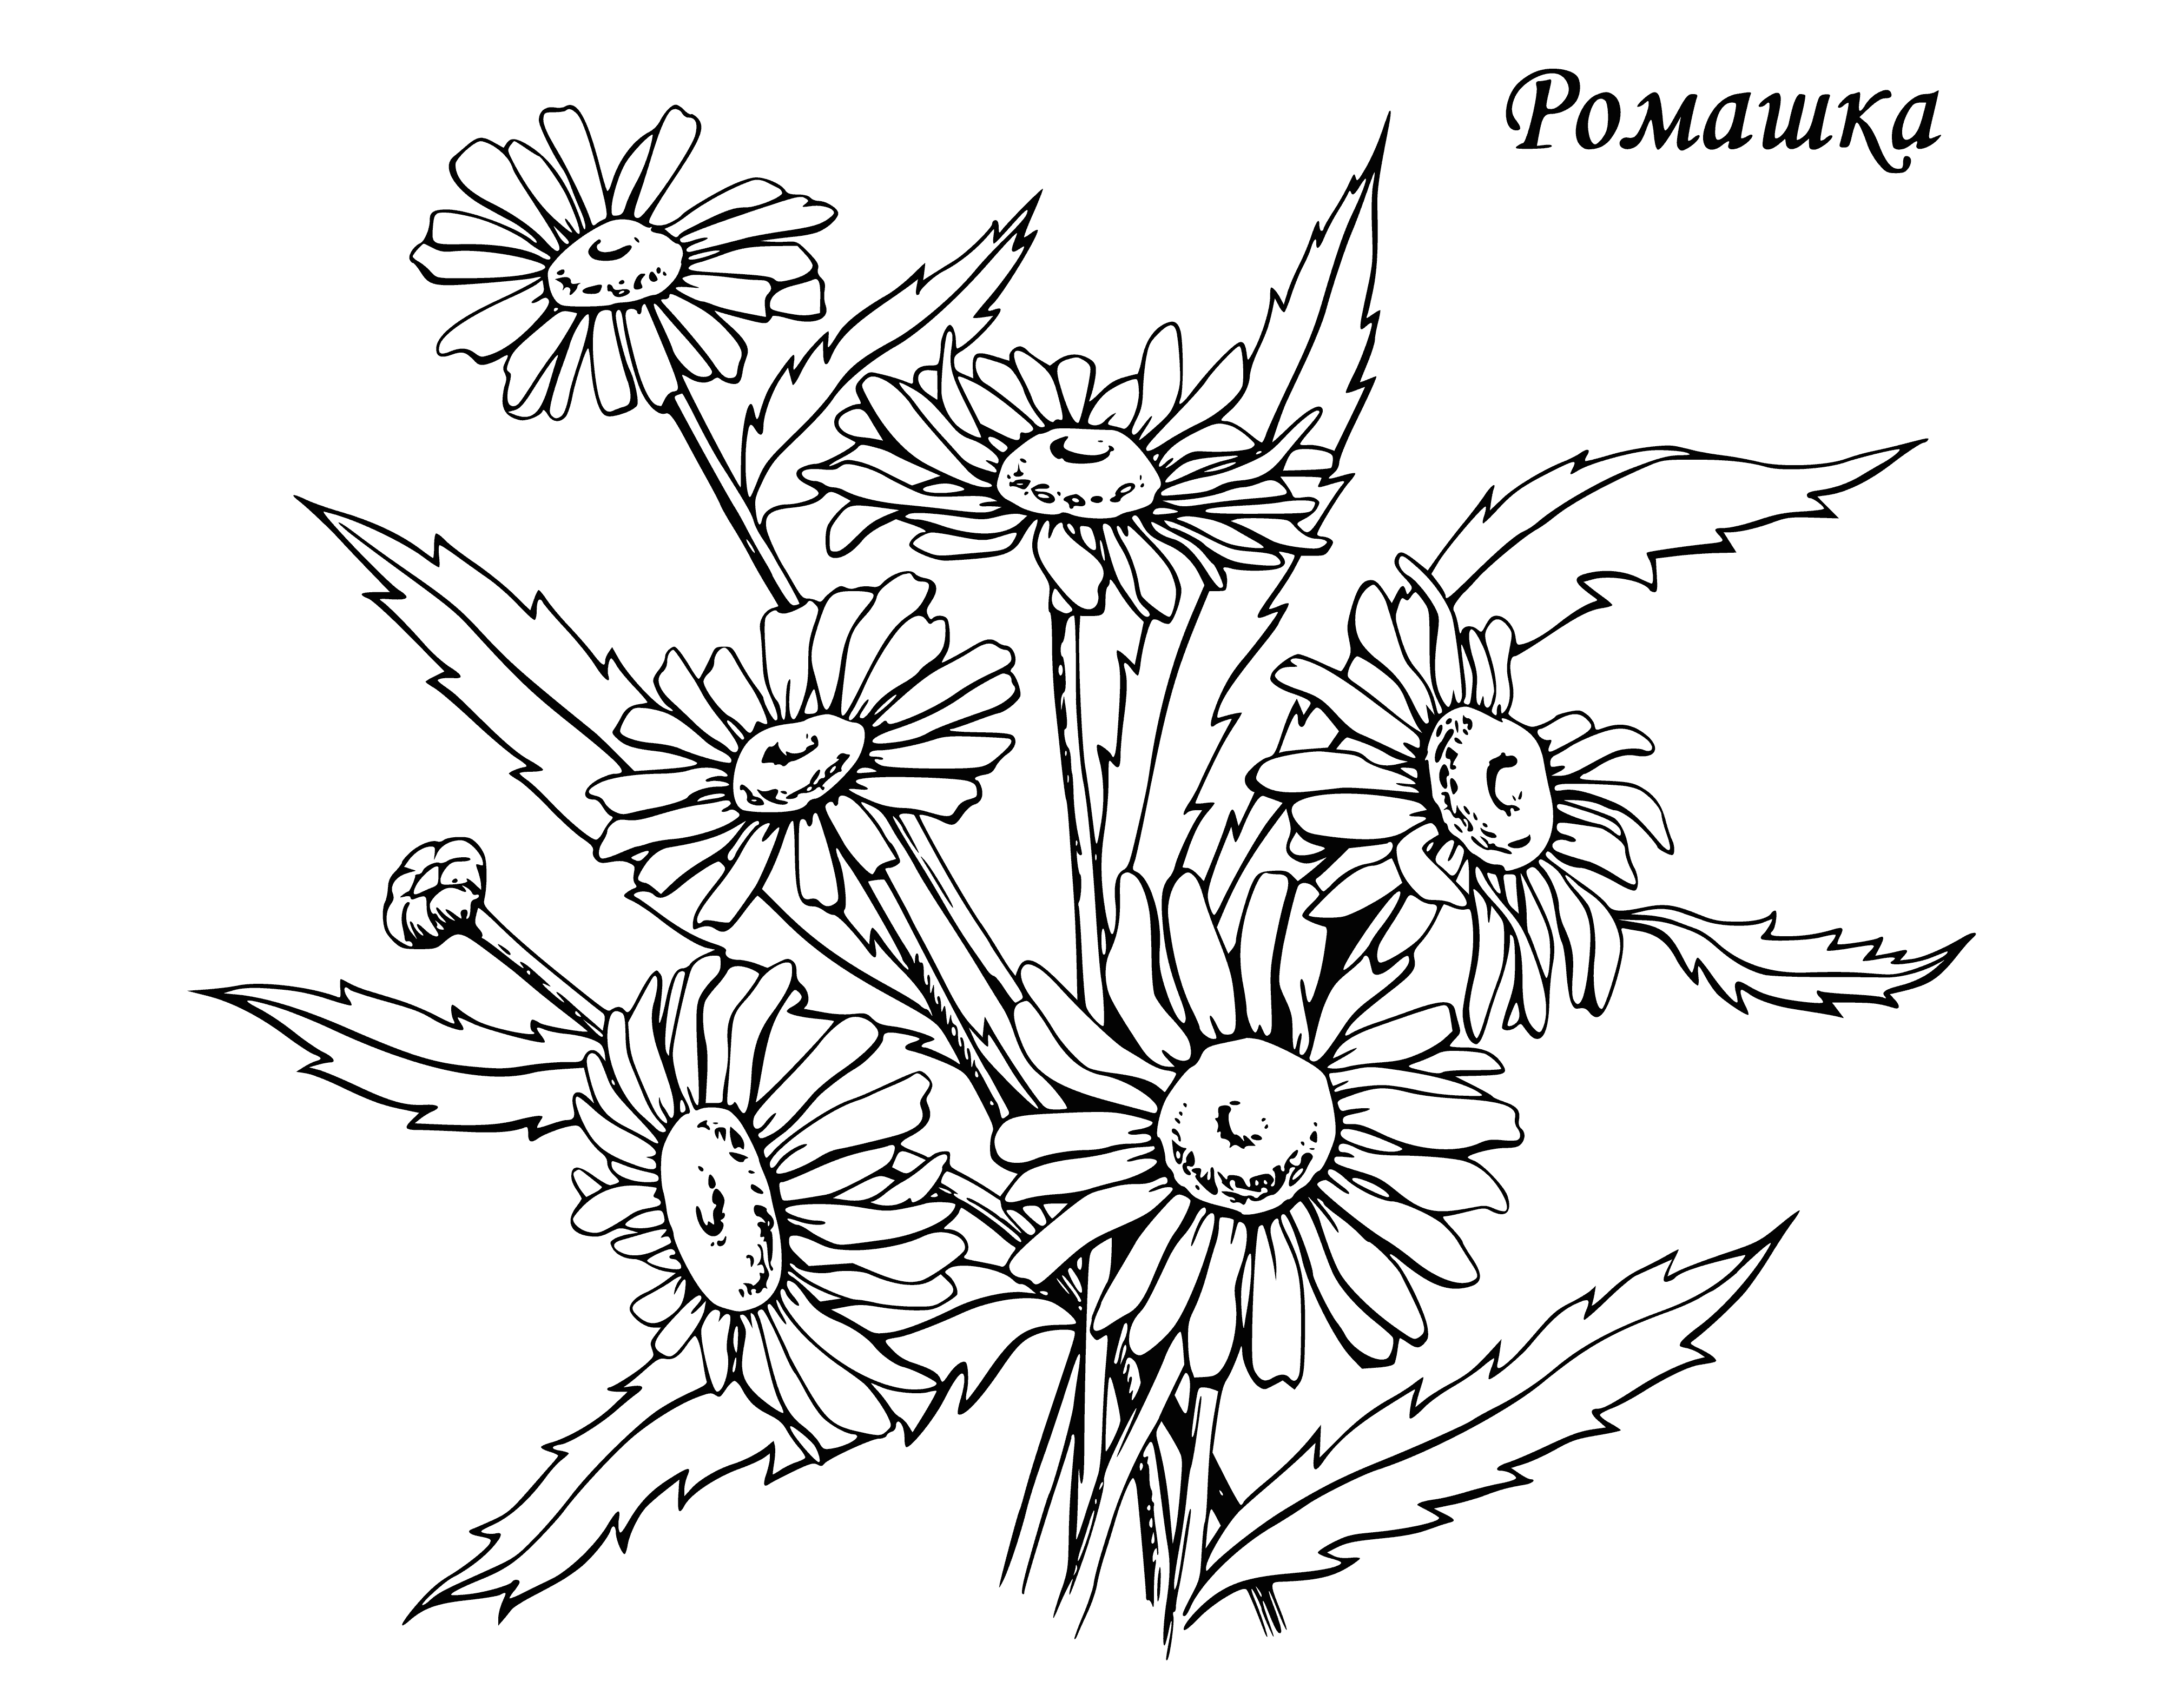 coloring page: Small, white chamomile flower with yellow center, delicate petals, long slender stem, and lance-shaped green leaves.